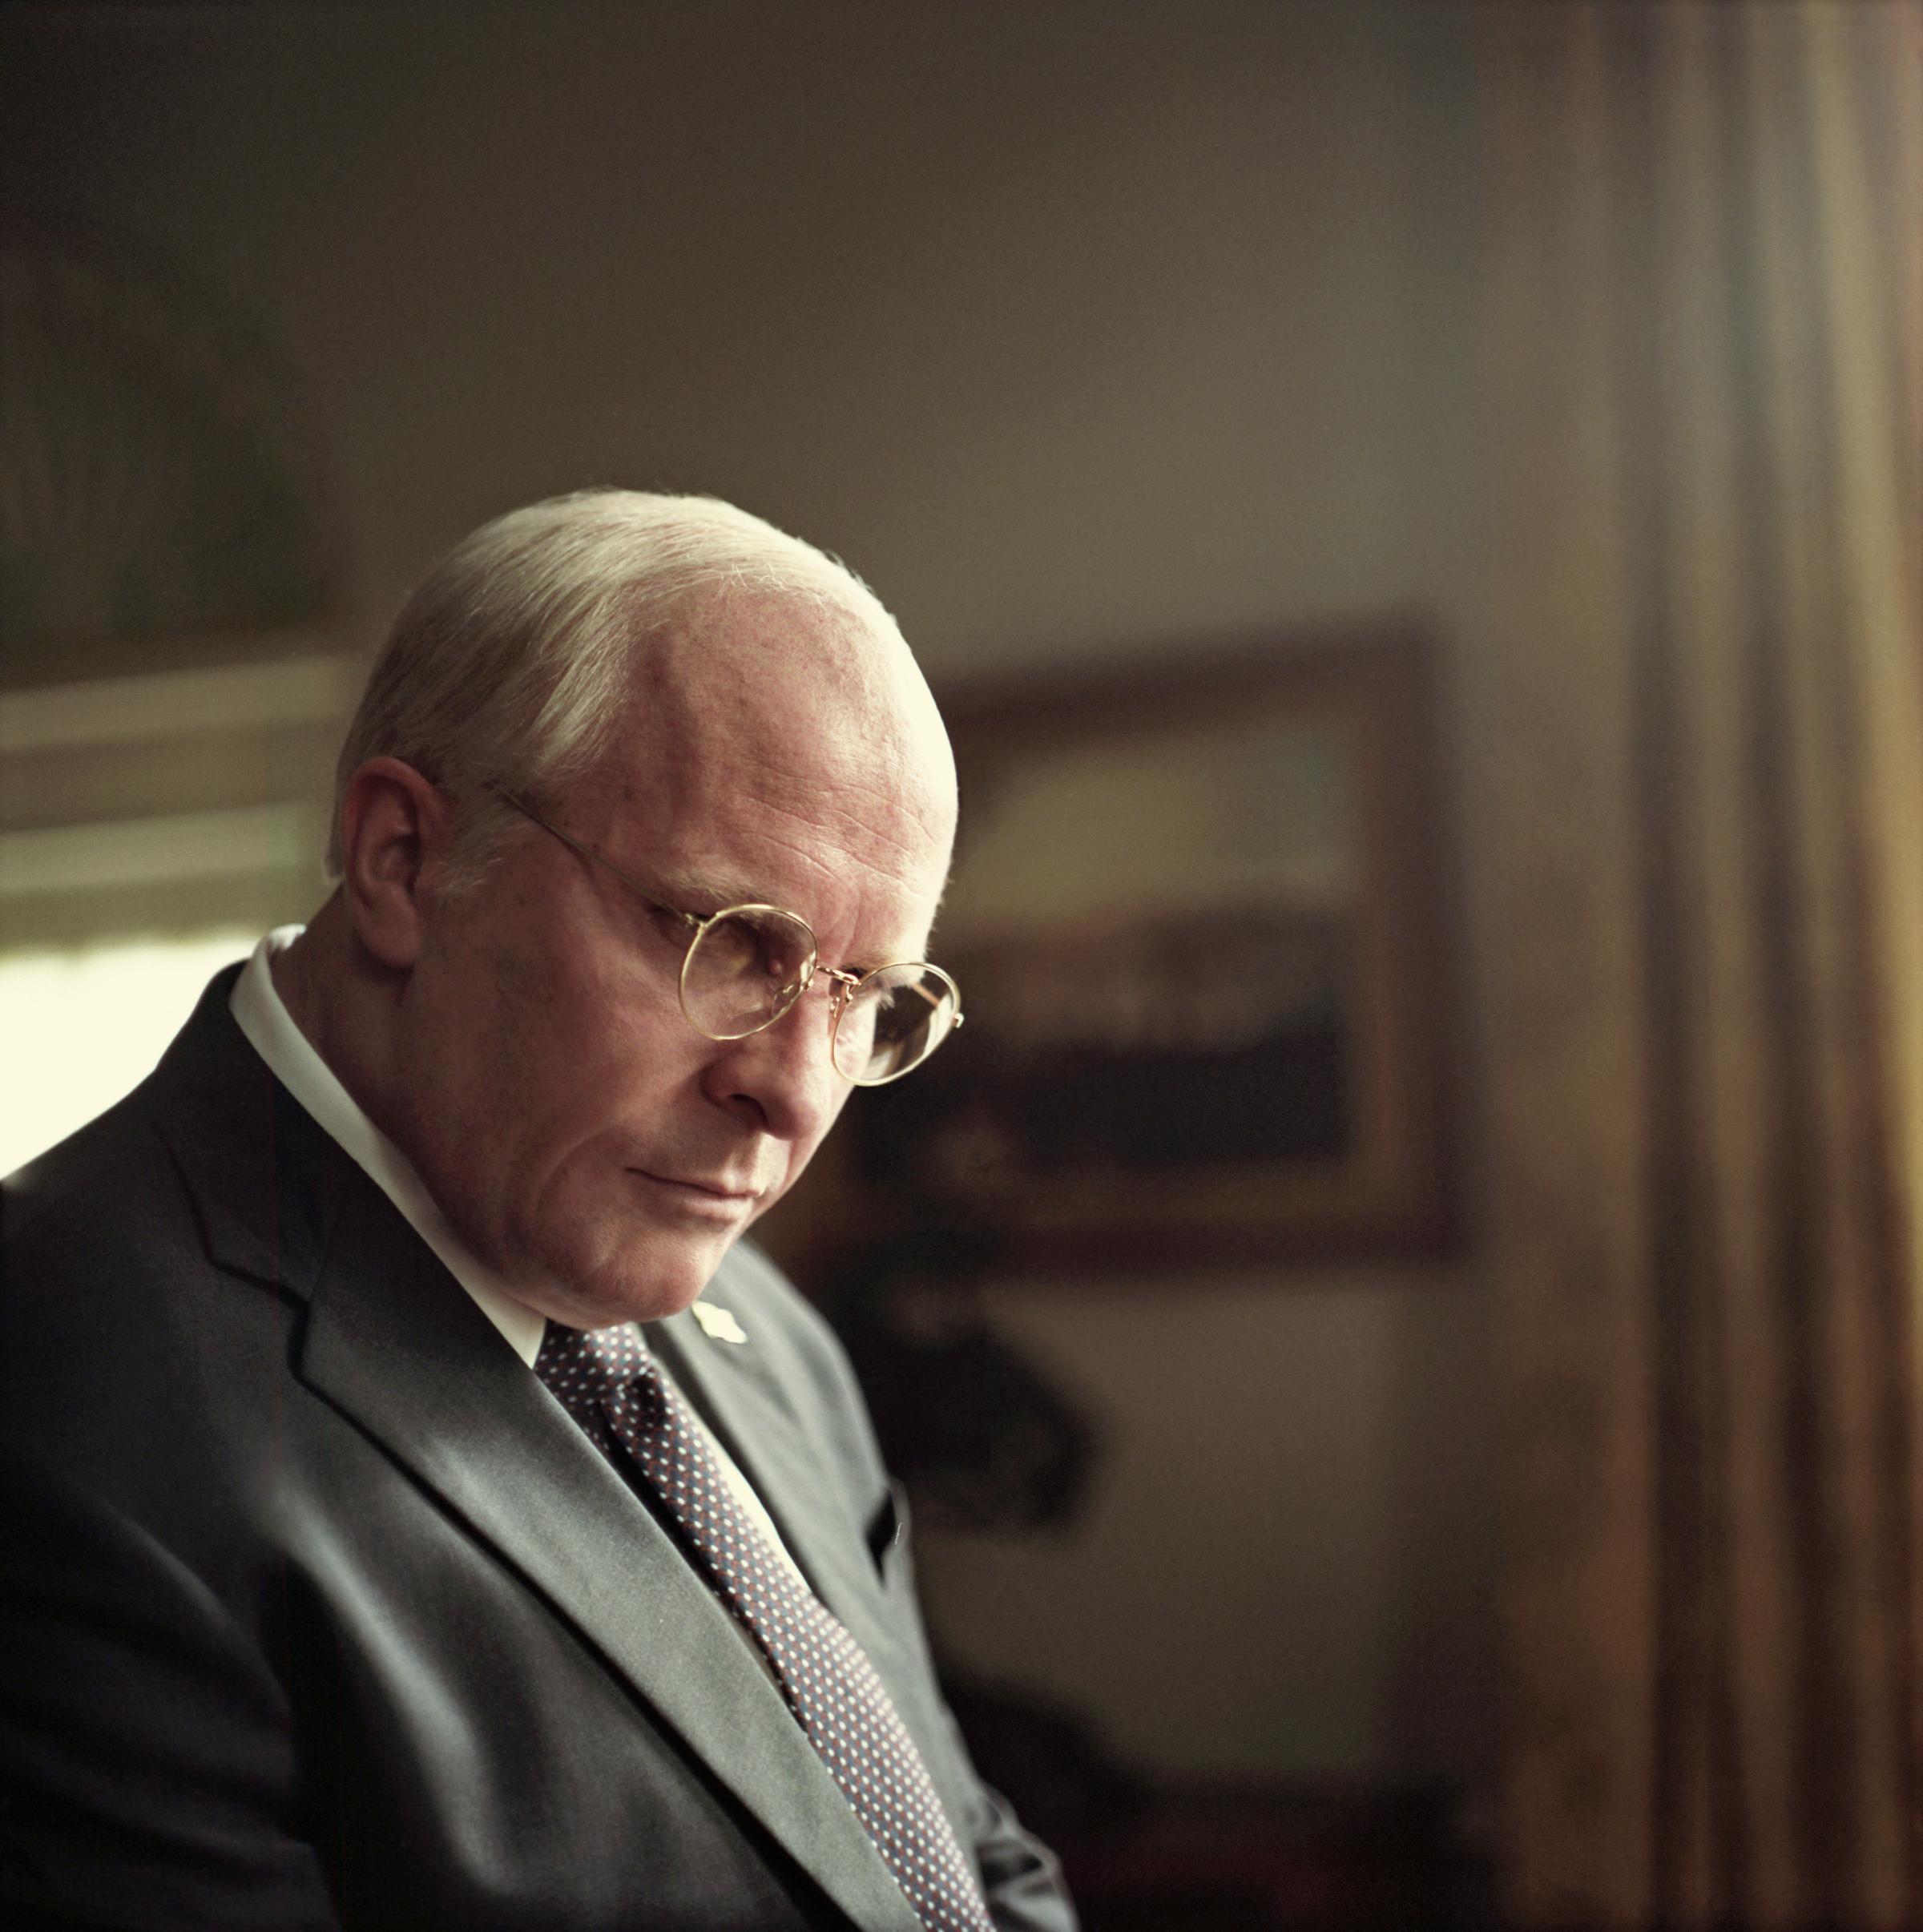 Christian Bale as Dick Cheney in Adam McKay’s VICE, an Annapurna Pictures release. Credit : Greig Fraser / Annapurna Pictures2018 © Annapurna Pictures, LLC. All Rights Reserved.